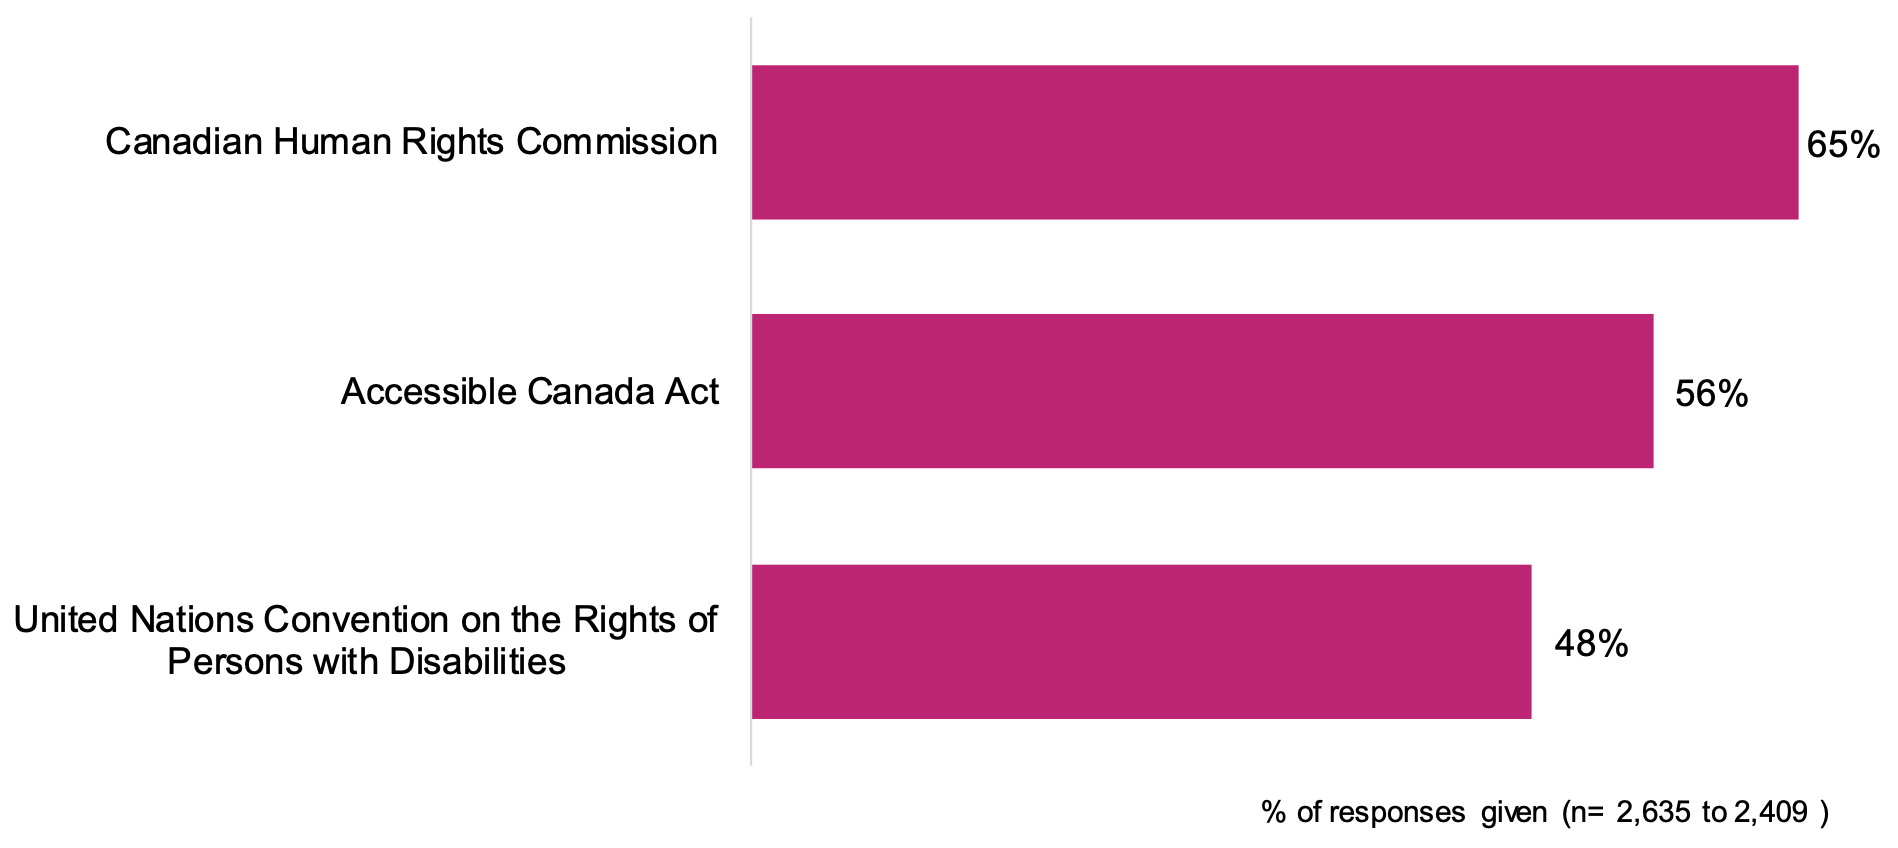 This is a bar chart of how familiar survey participants are with the Canadian Human Rights Commission, the Accessible Canada Act, and the UN Convention on the Rights of Persons with Disabilities.